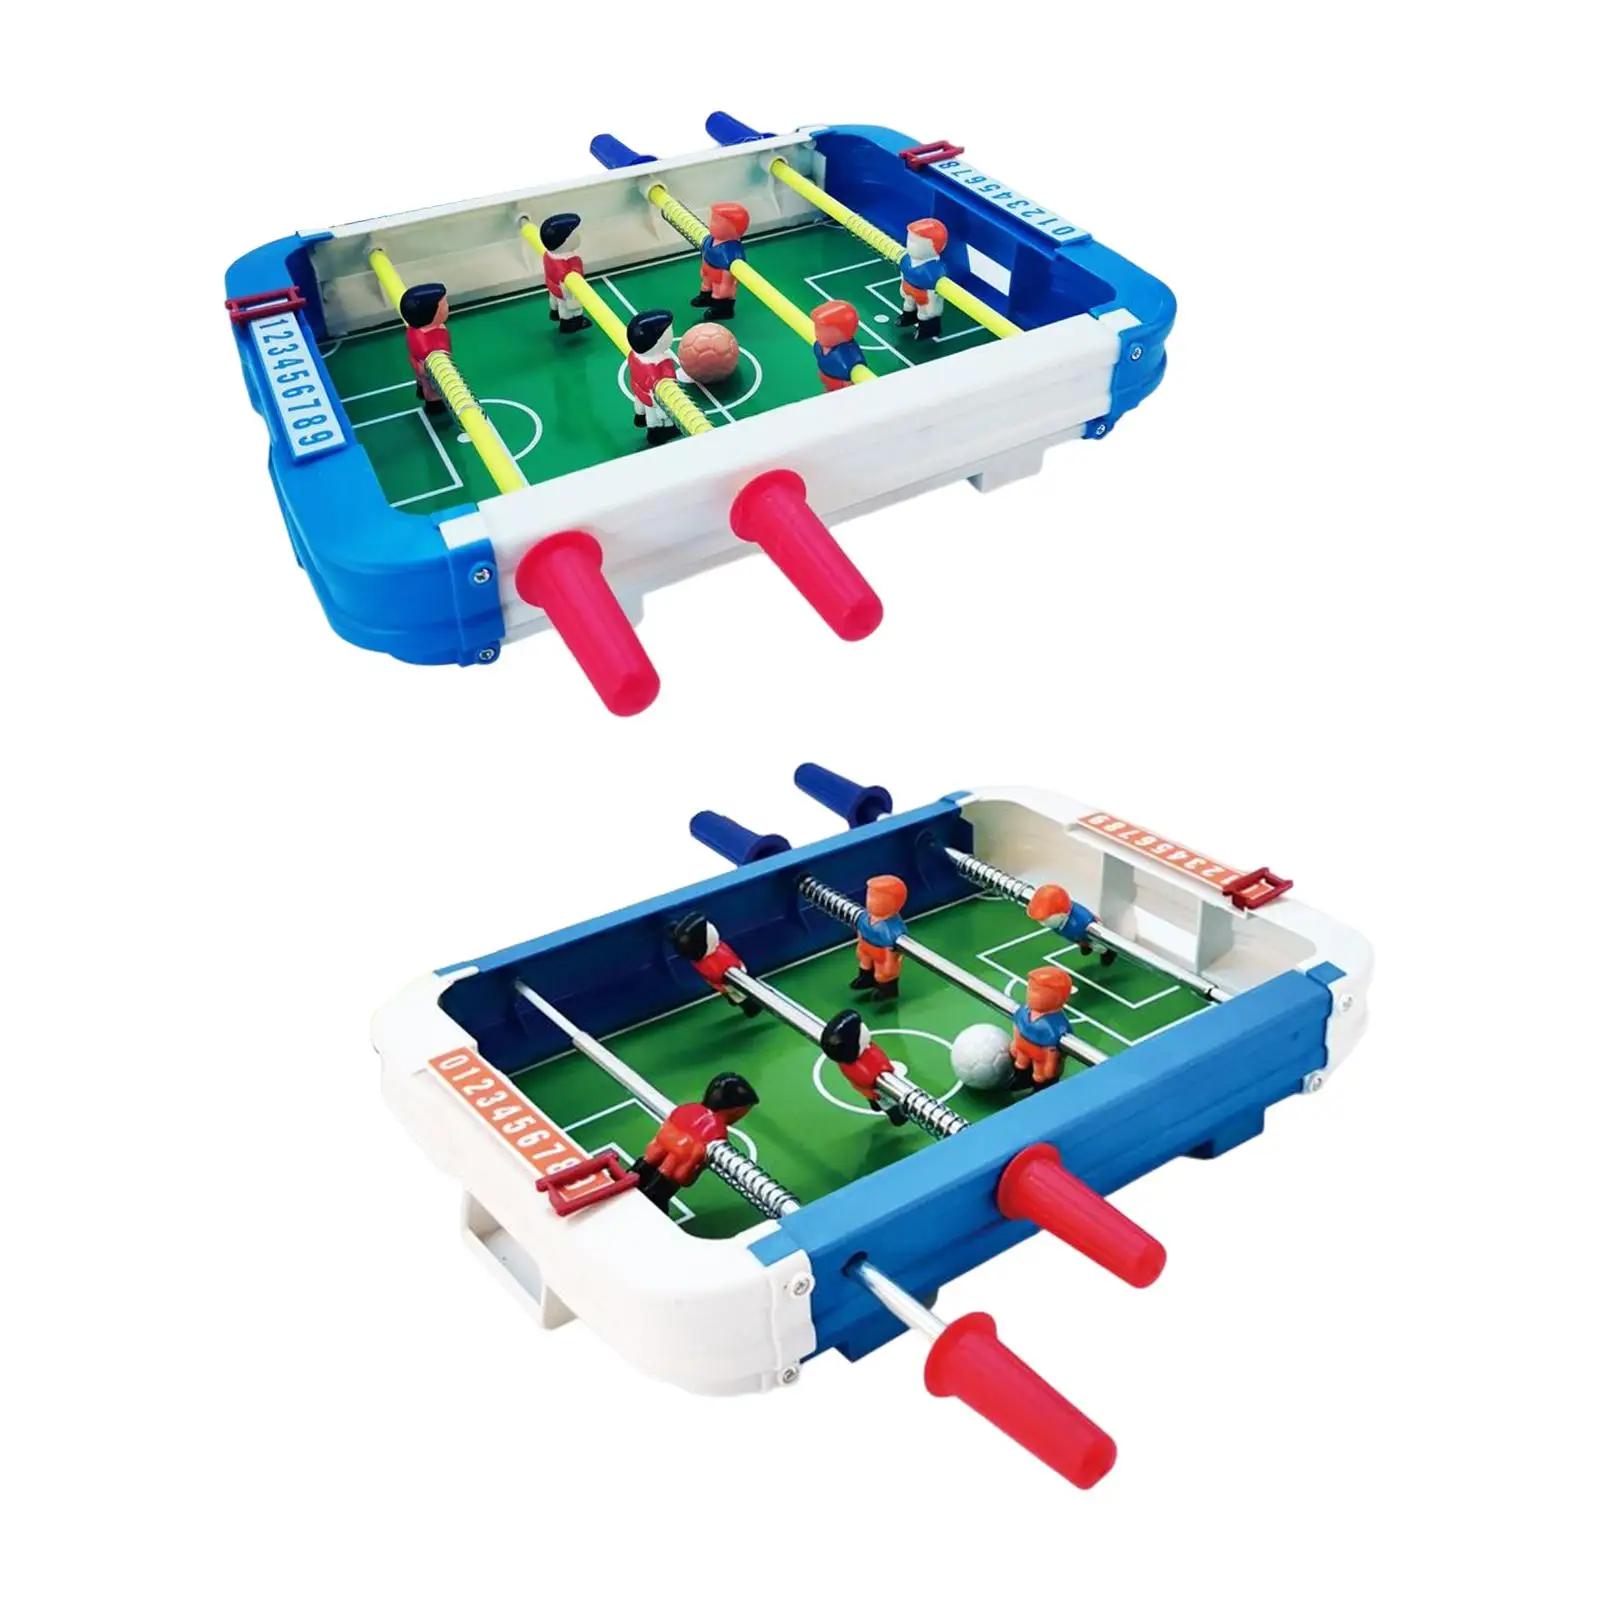 Compact Mini Foosball Table, Table Top Football Game Early Educational Toy Tabletop Soccer Game for Game Rooms Adults Kids